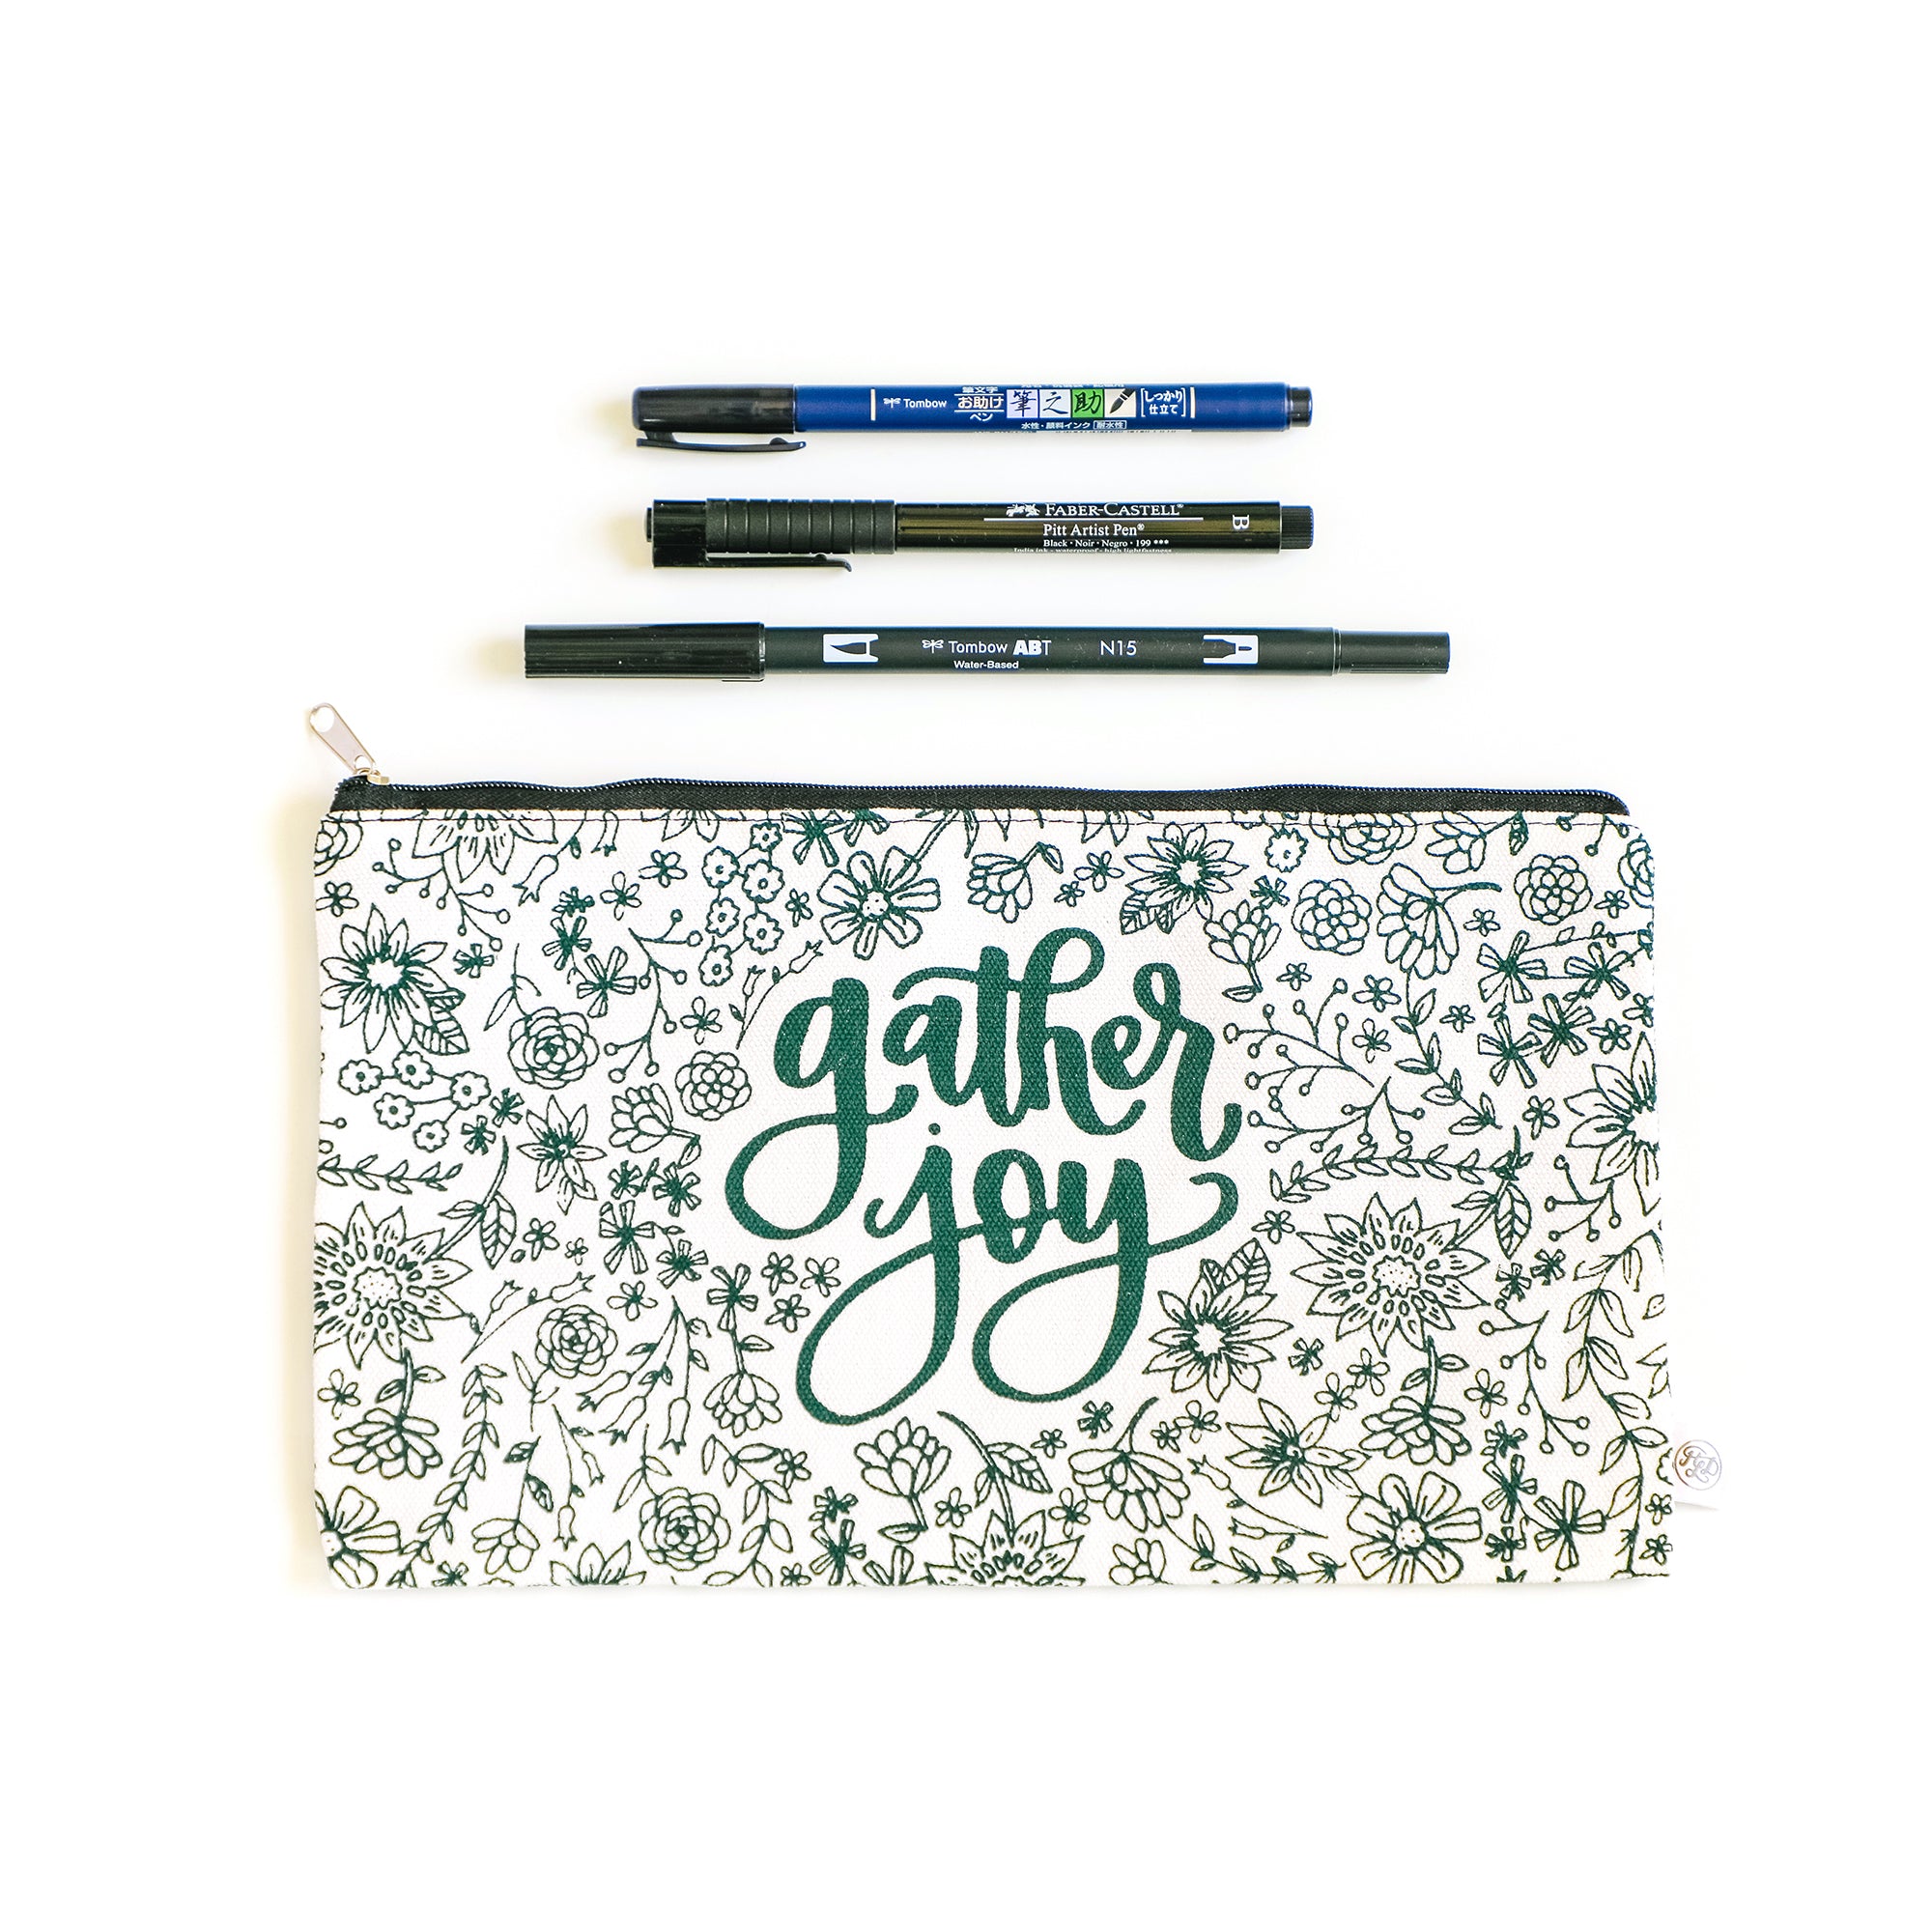 Tombow's Dual Brush Pens are perfect for coloring! Grab this